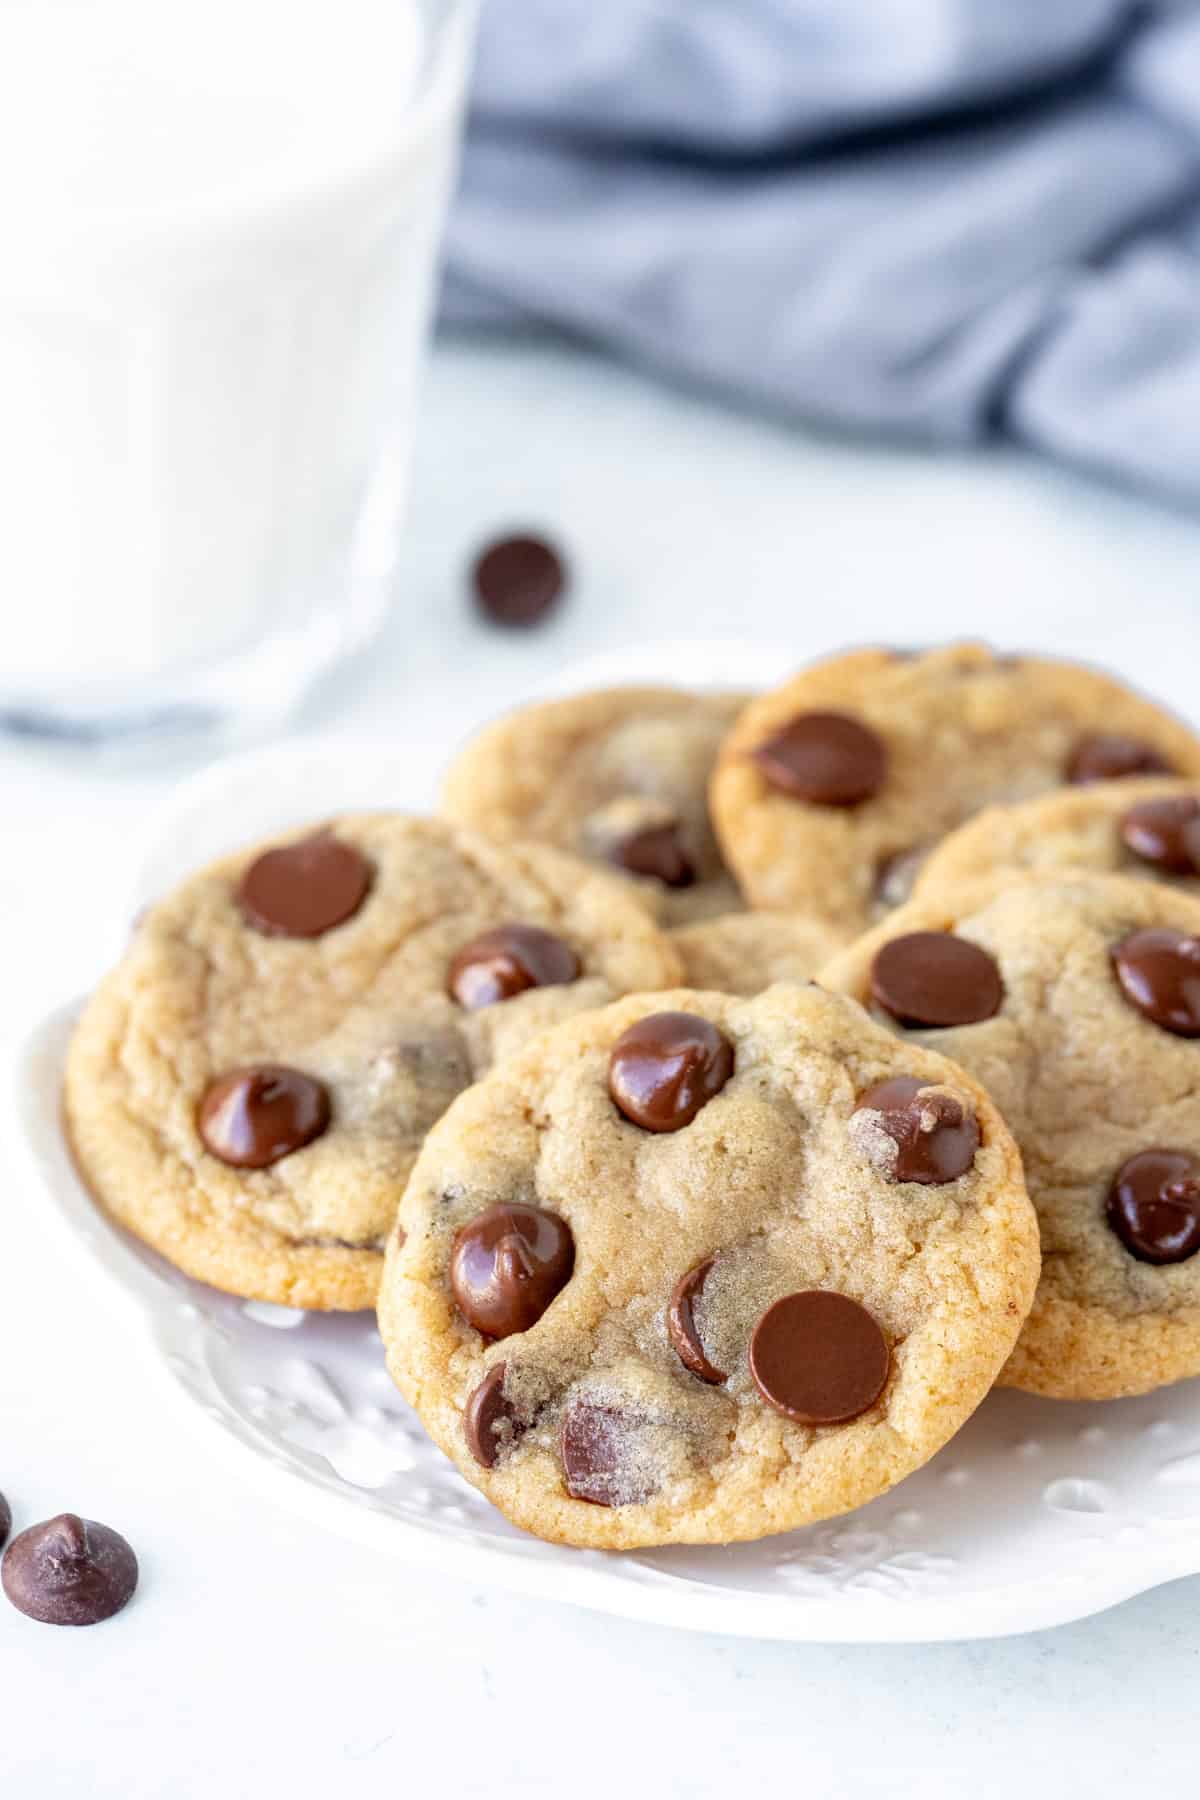 Plate of mini chocolate chip cookies with glass of milk